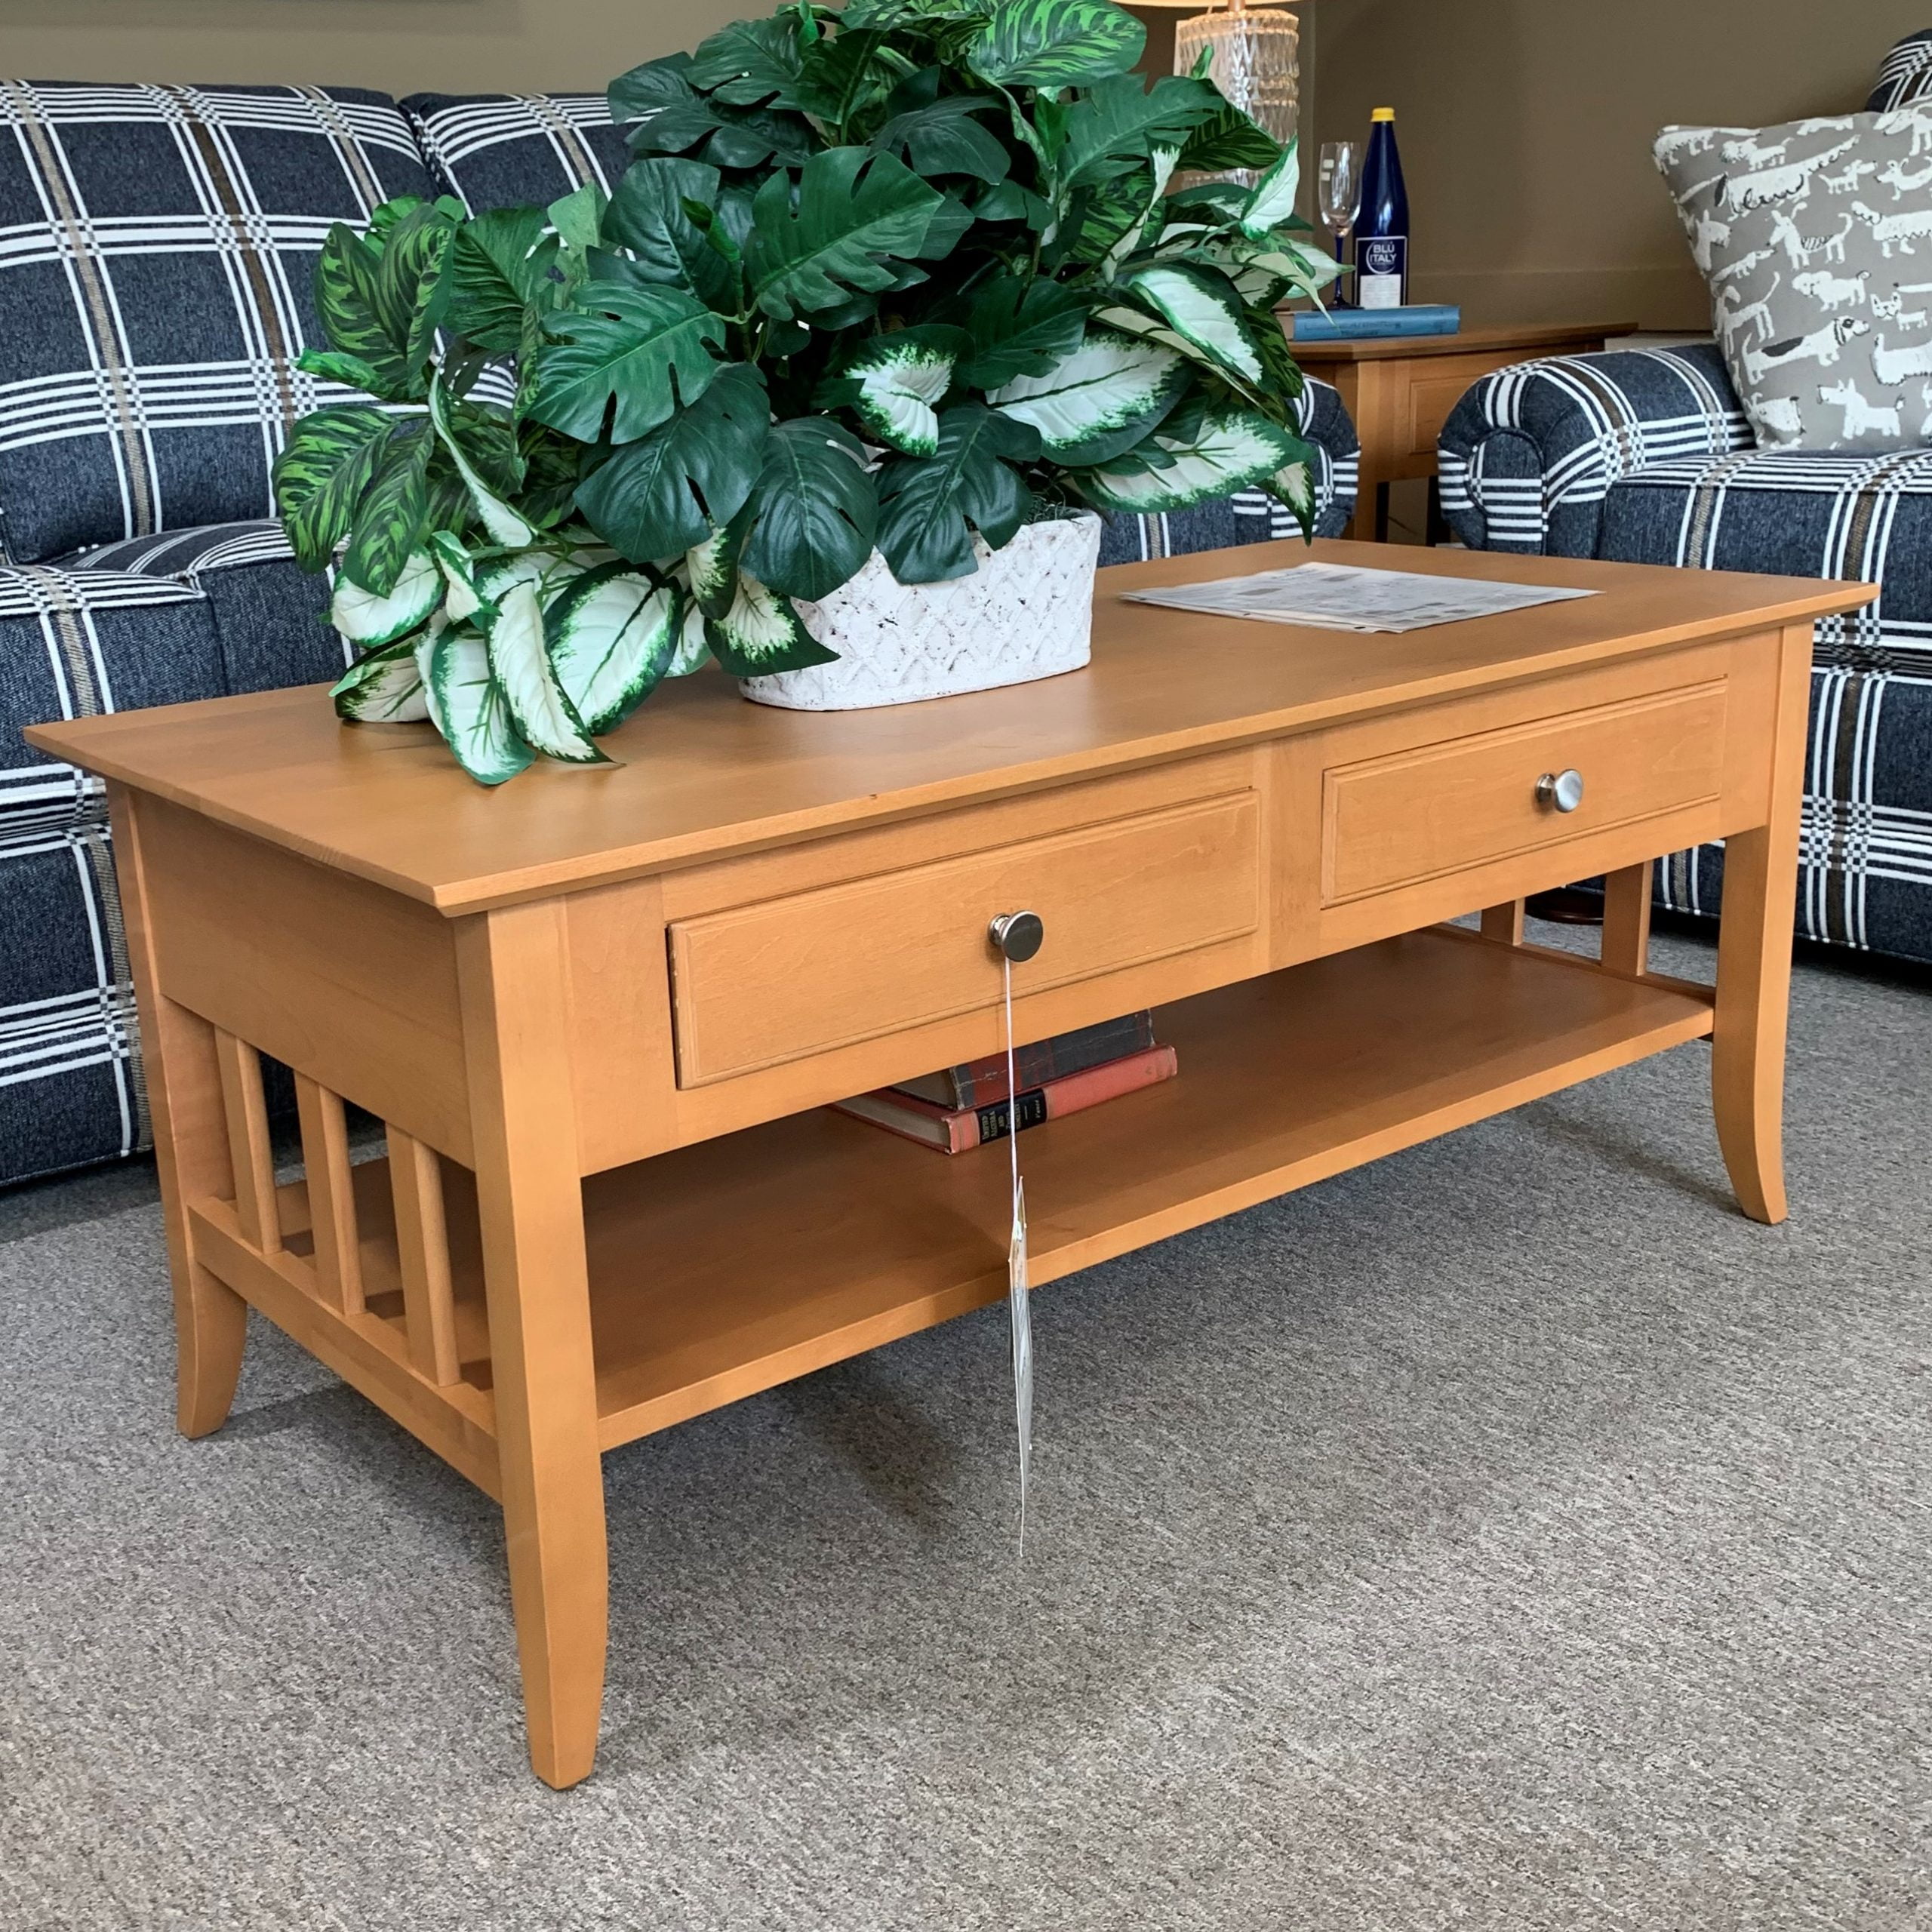 Leister light wooden coffee table with two drawers